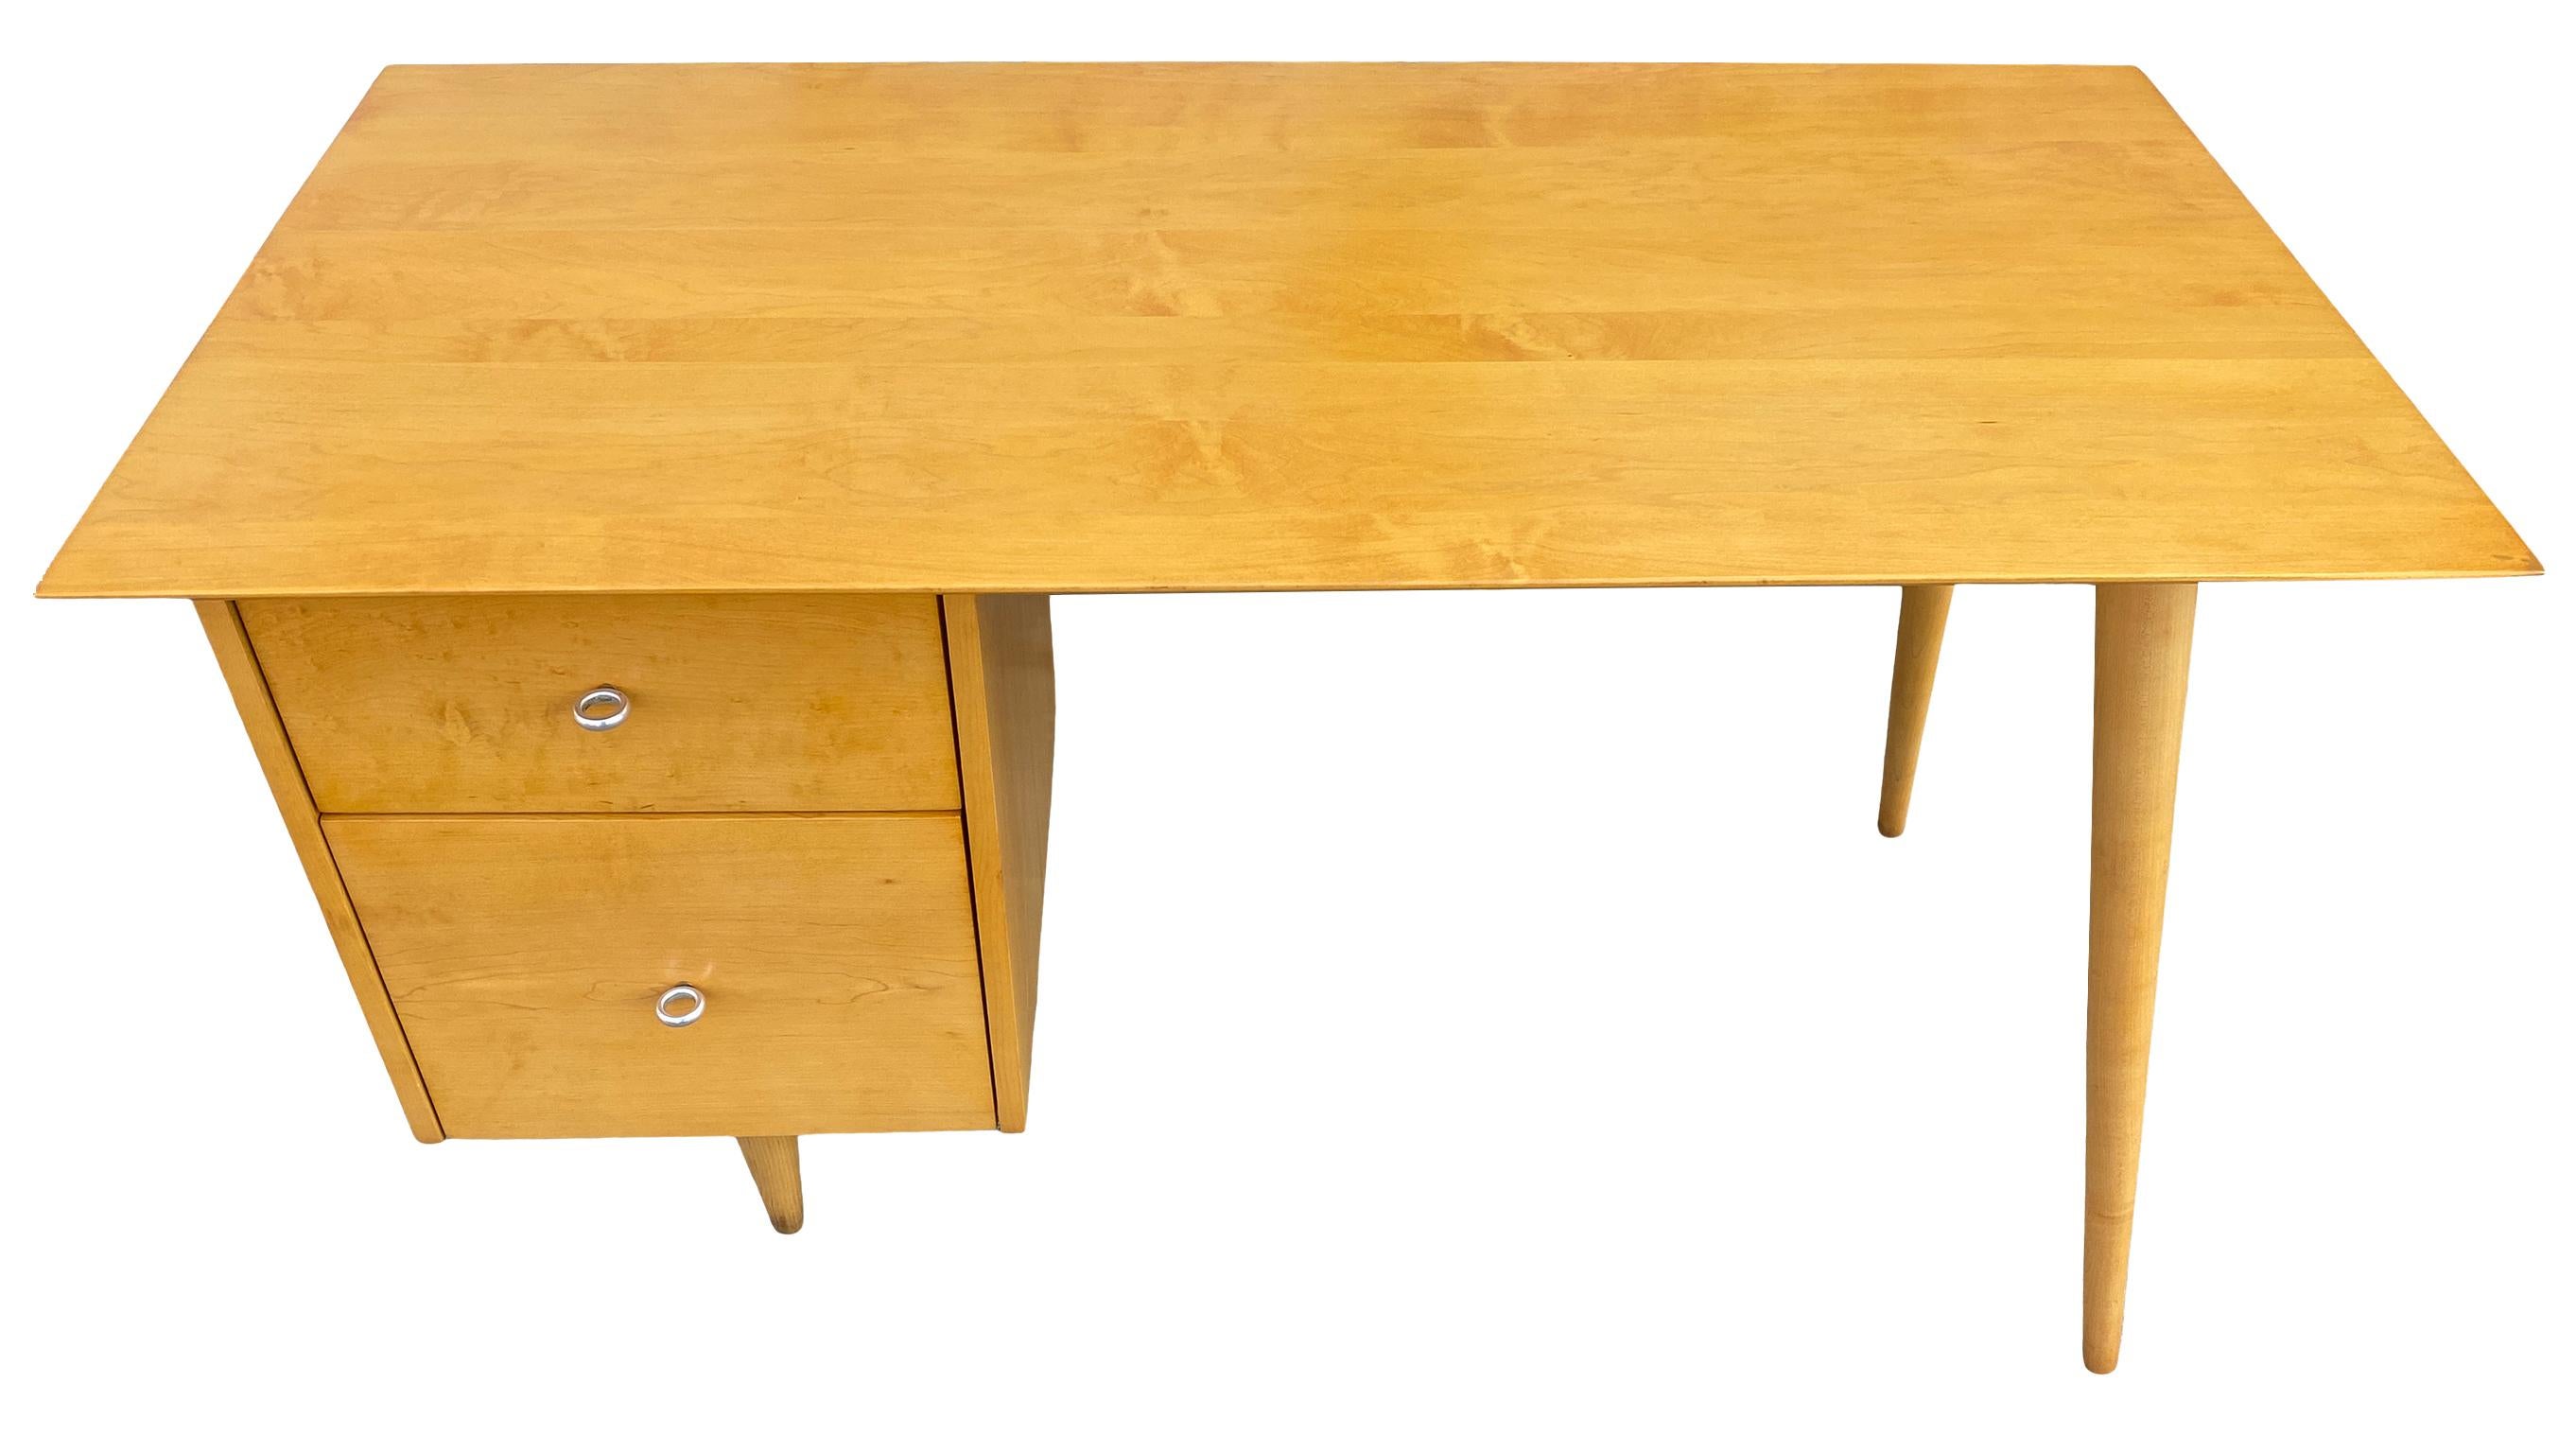 Beautiful Paul McCobb Planner Group #1560 double drawer desk blonde maple finish with aluminum ring pull knobs solid maple. Desk has been professional refinished. Very beautiful designed desk on tapered legs, all solid maple. All legs unscrew.